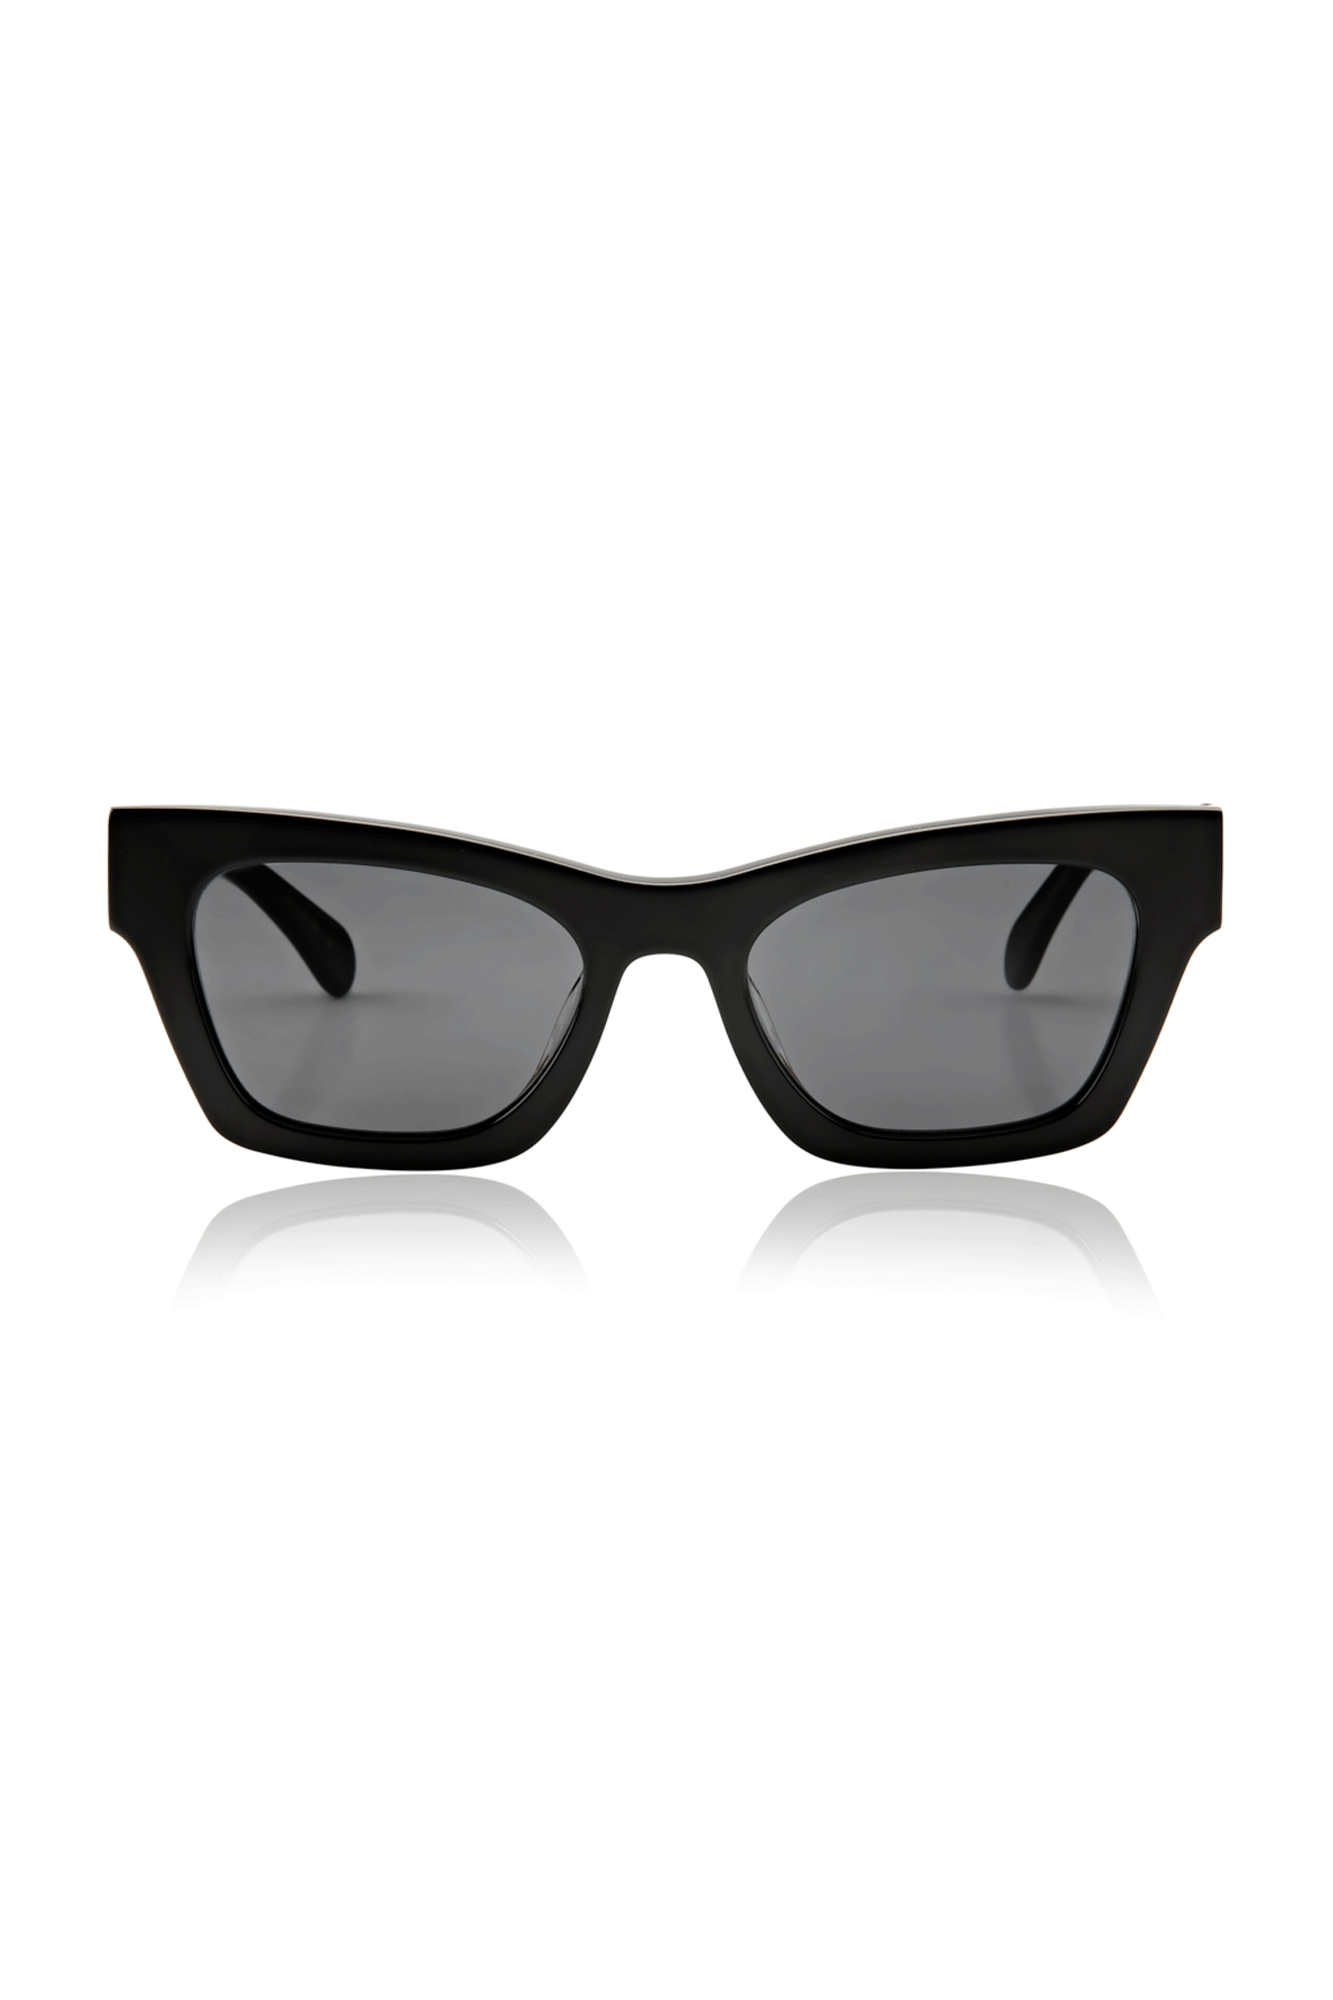 Rue Saint Benoit from Oscar x Frank is a unisex handcrafted frame with bold thick Italian acetate in sleek gloss black. Designed for long-term durability in the OXF in-house design lab, this SS/22 style is perfect for making a statement.